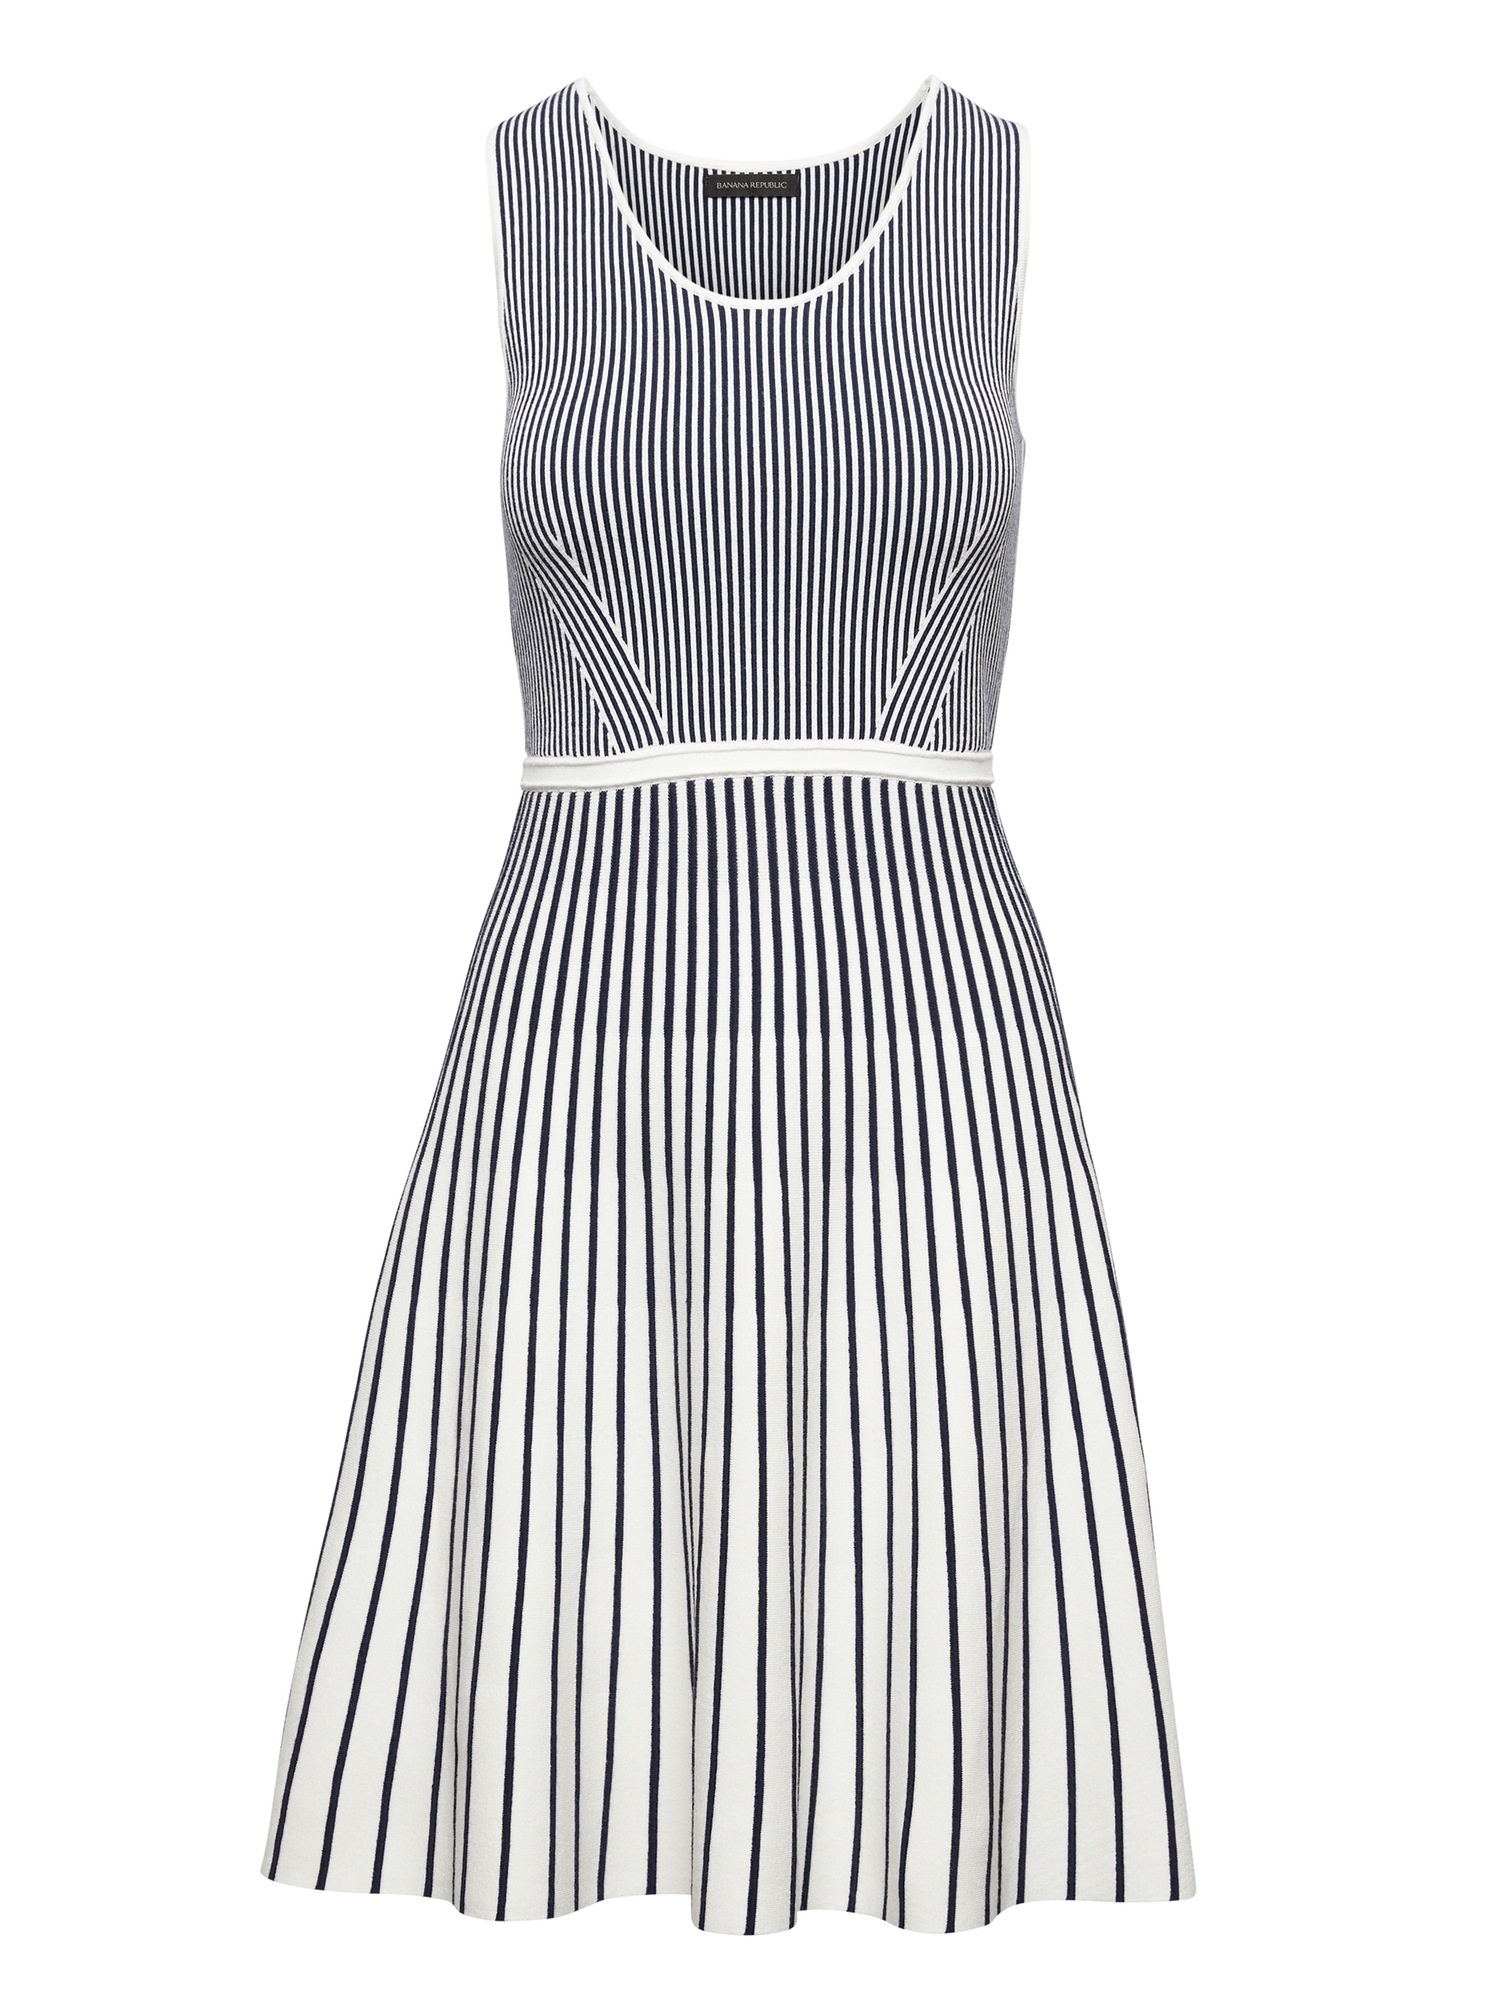 Stripe-Knit Fit-and-Flare Dress